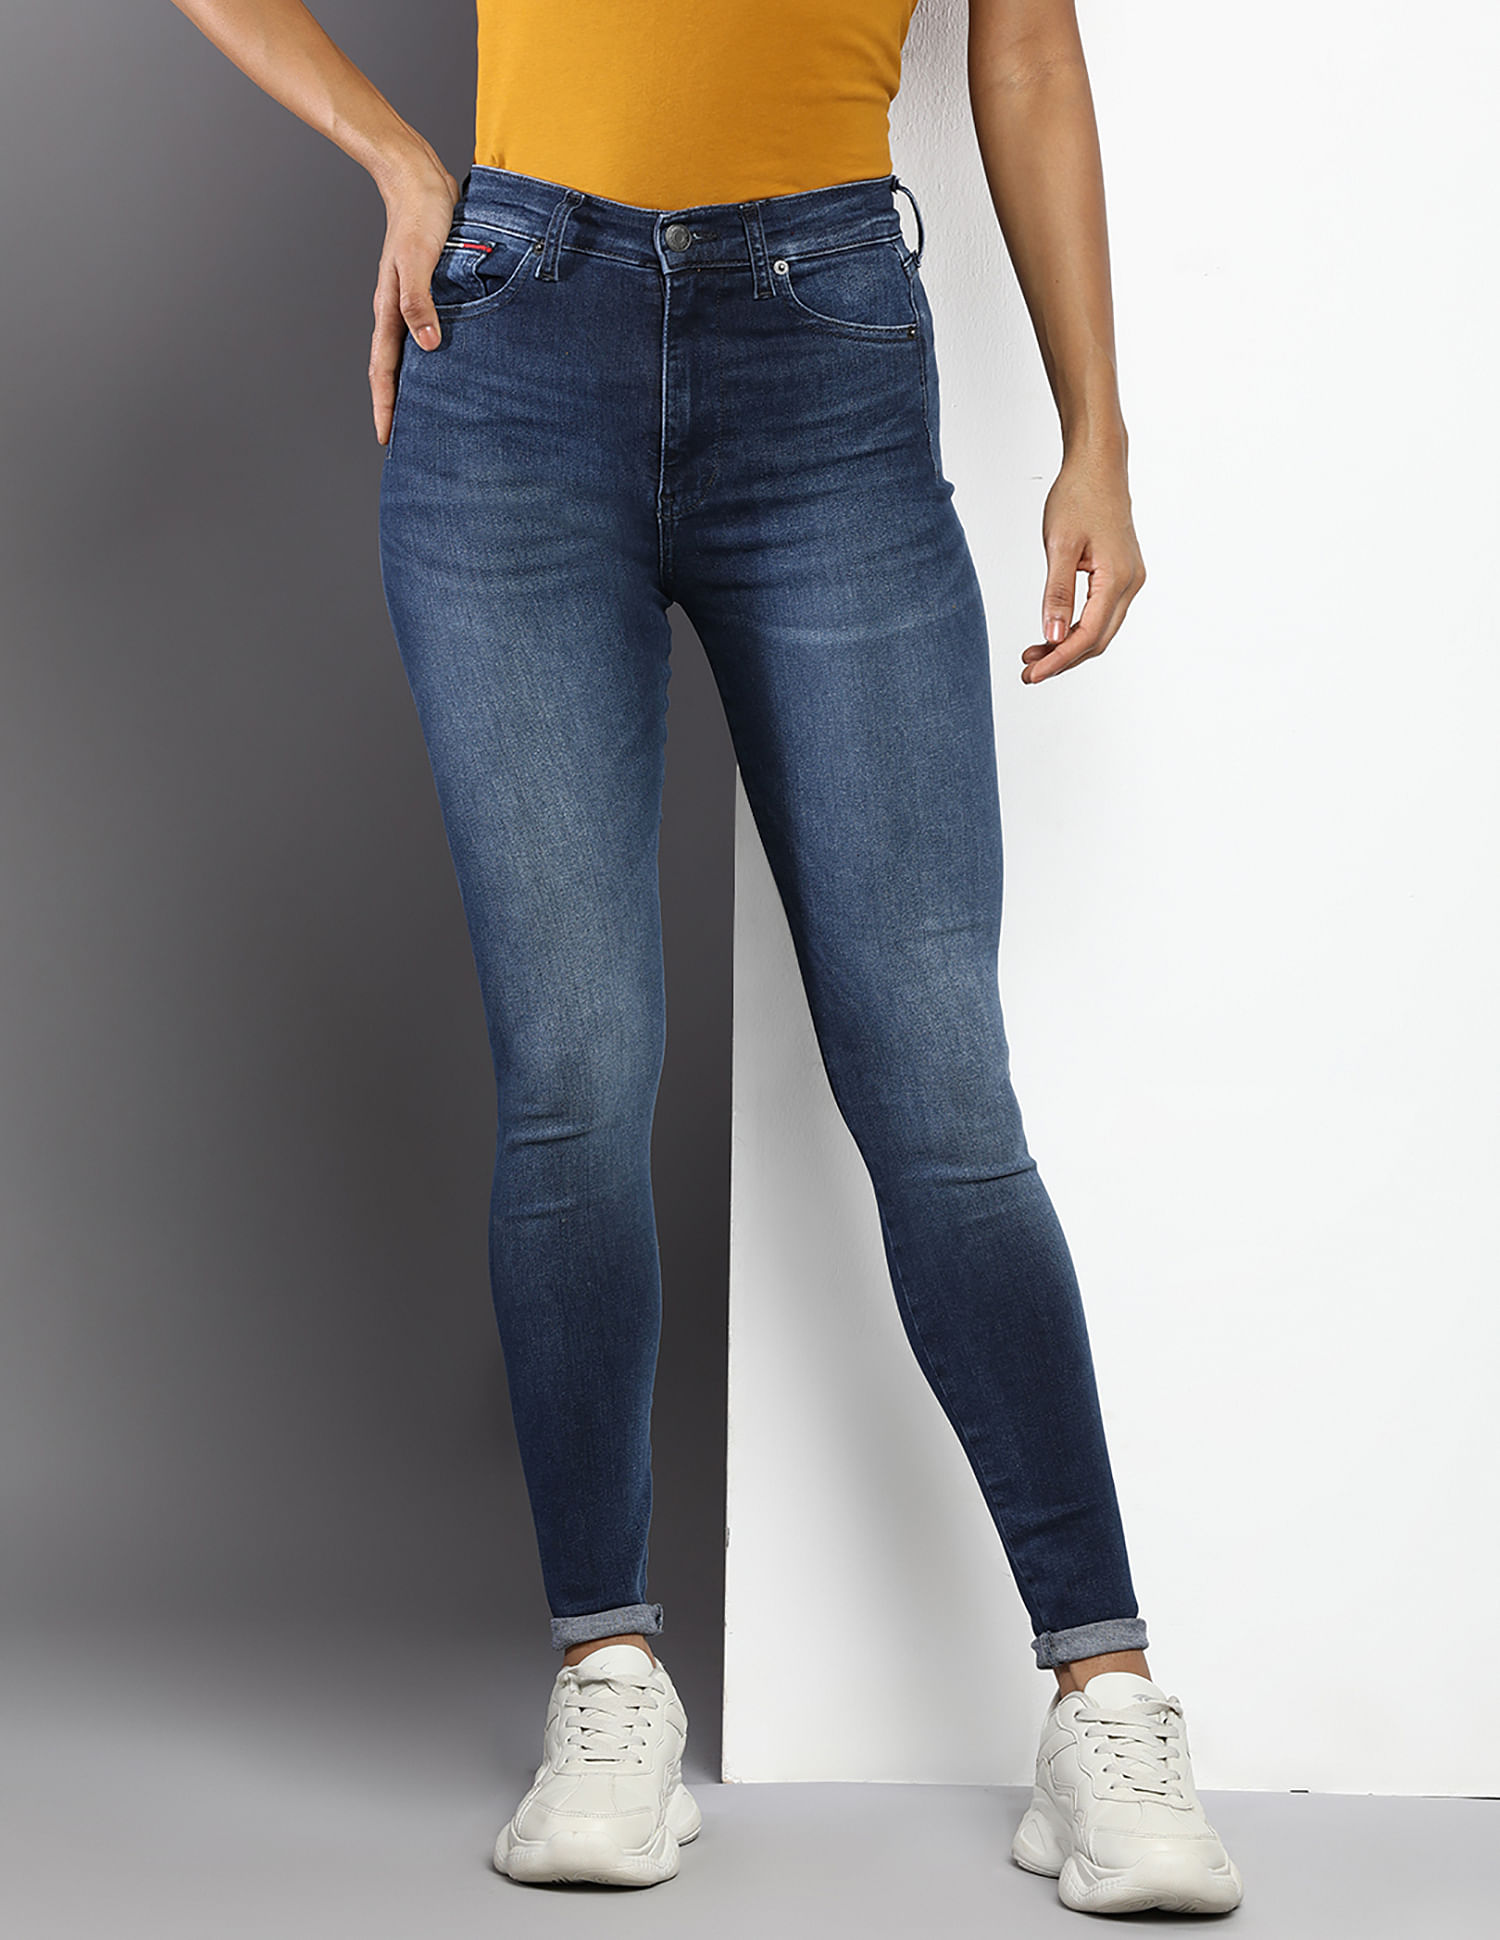 Buy Tommy Hilfiger Sylvia Rise Fit Mid Skinny Jeans